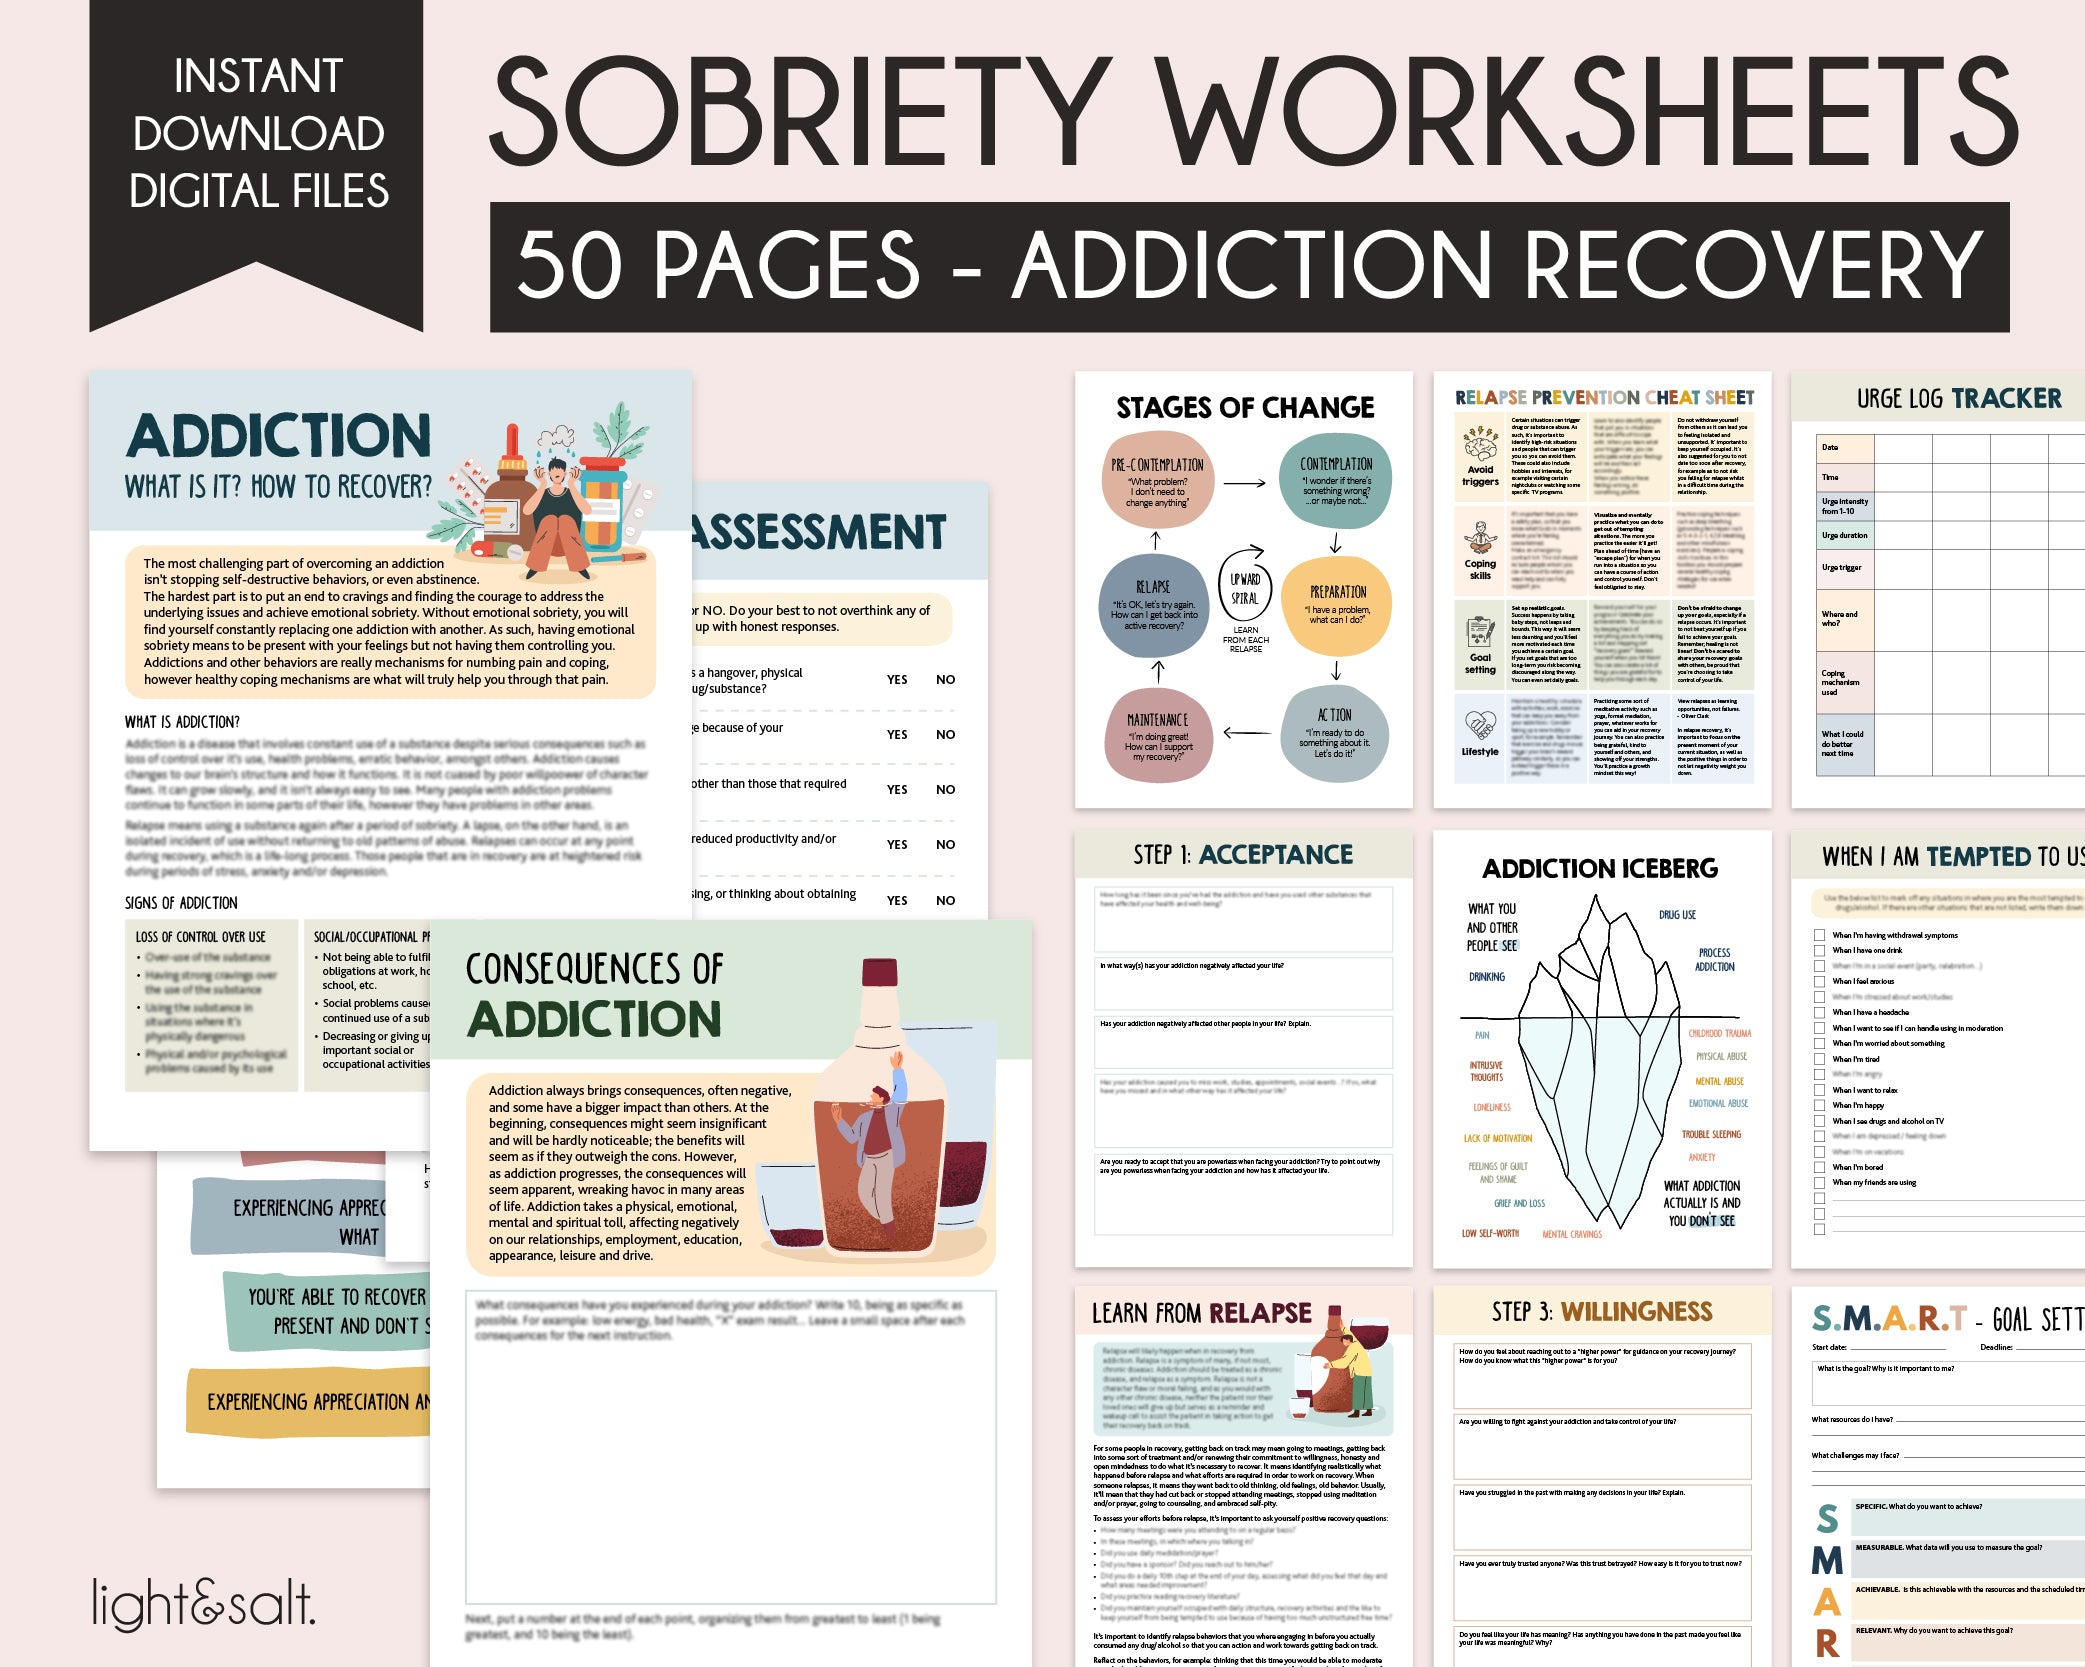 Sobriety Worksheets Addiction recovery therapy workbook